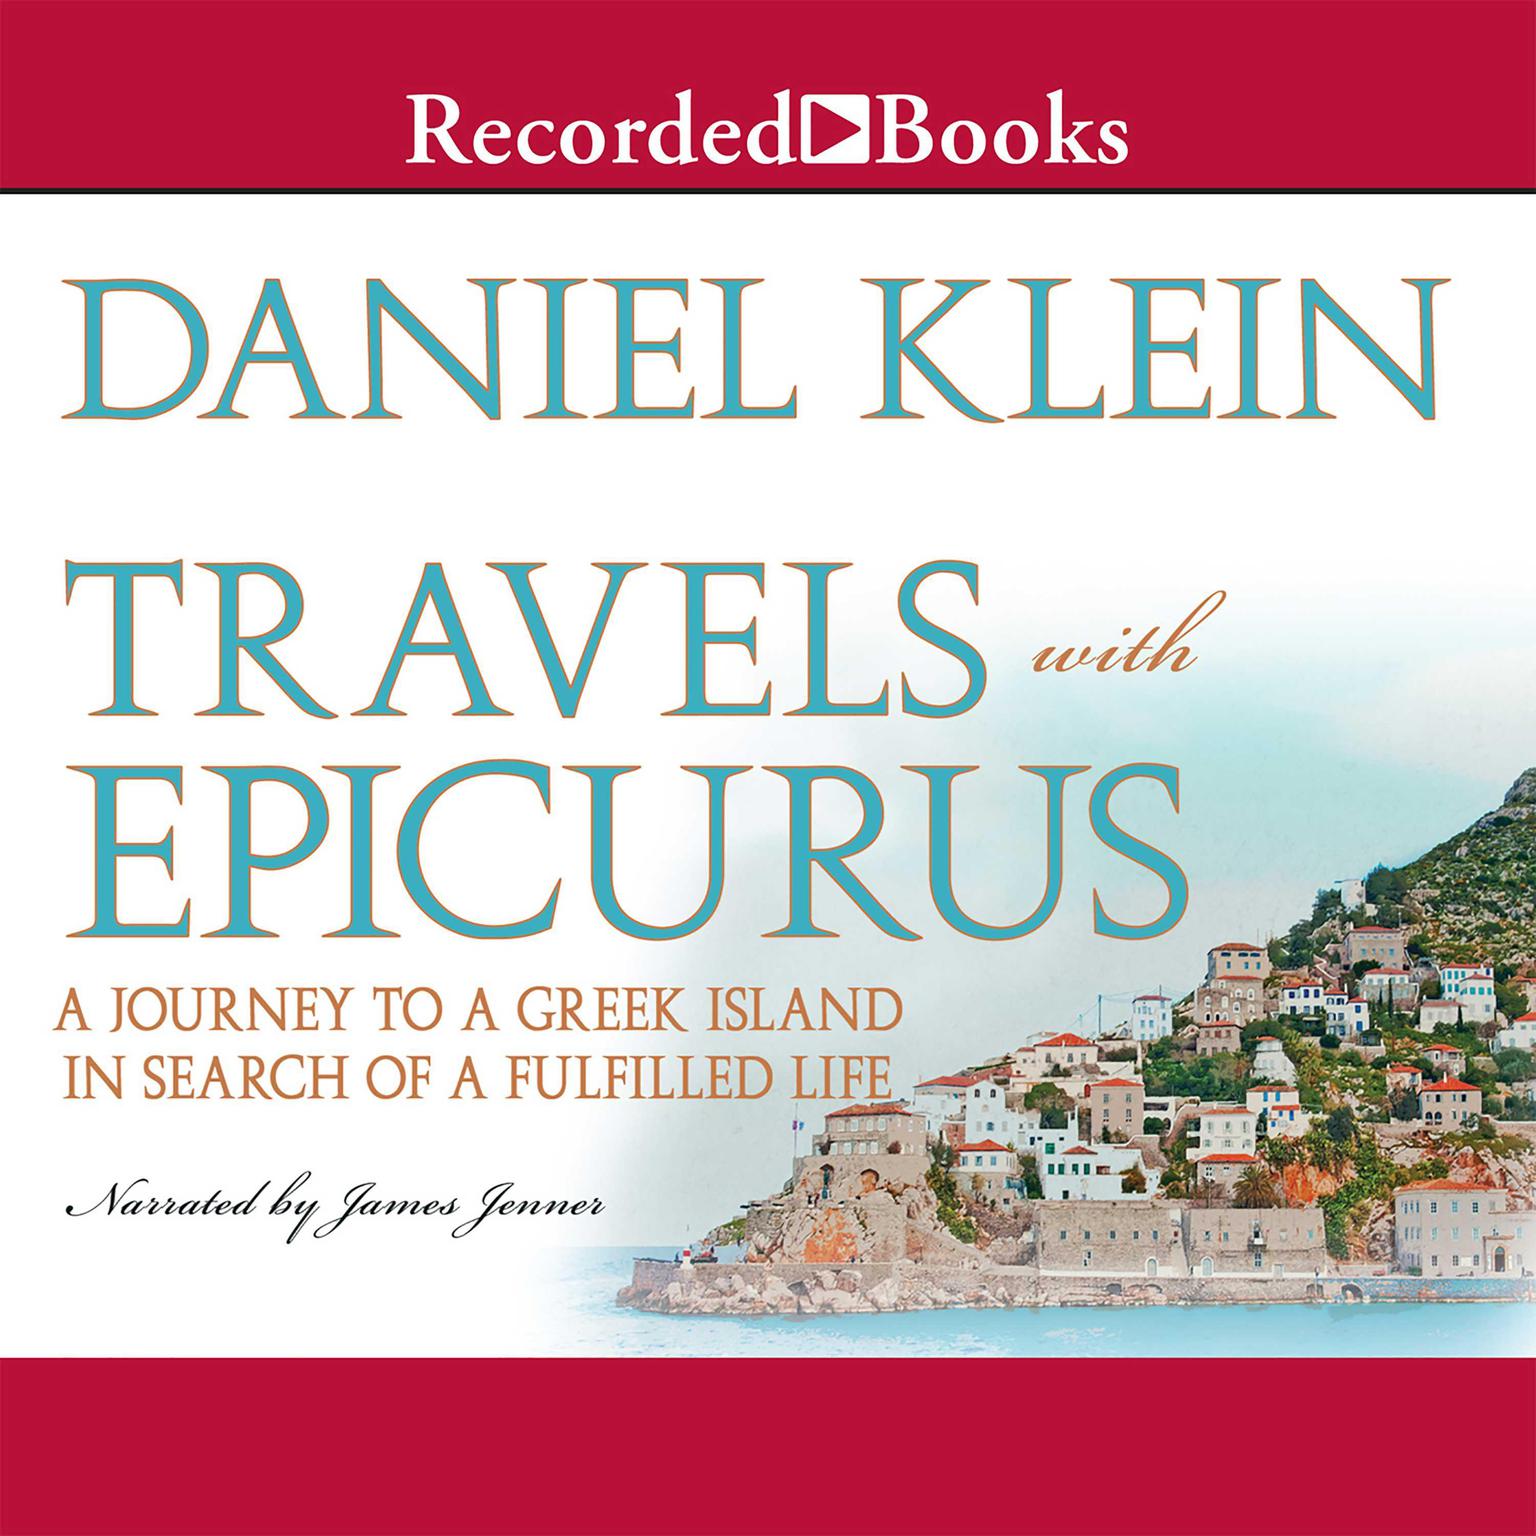 Travels with Epicurus: A Journey to a Greek Island In Search of a Fulfilled Life Audiobook, by Daniel Klein